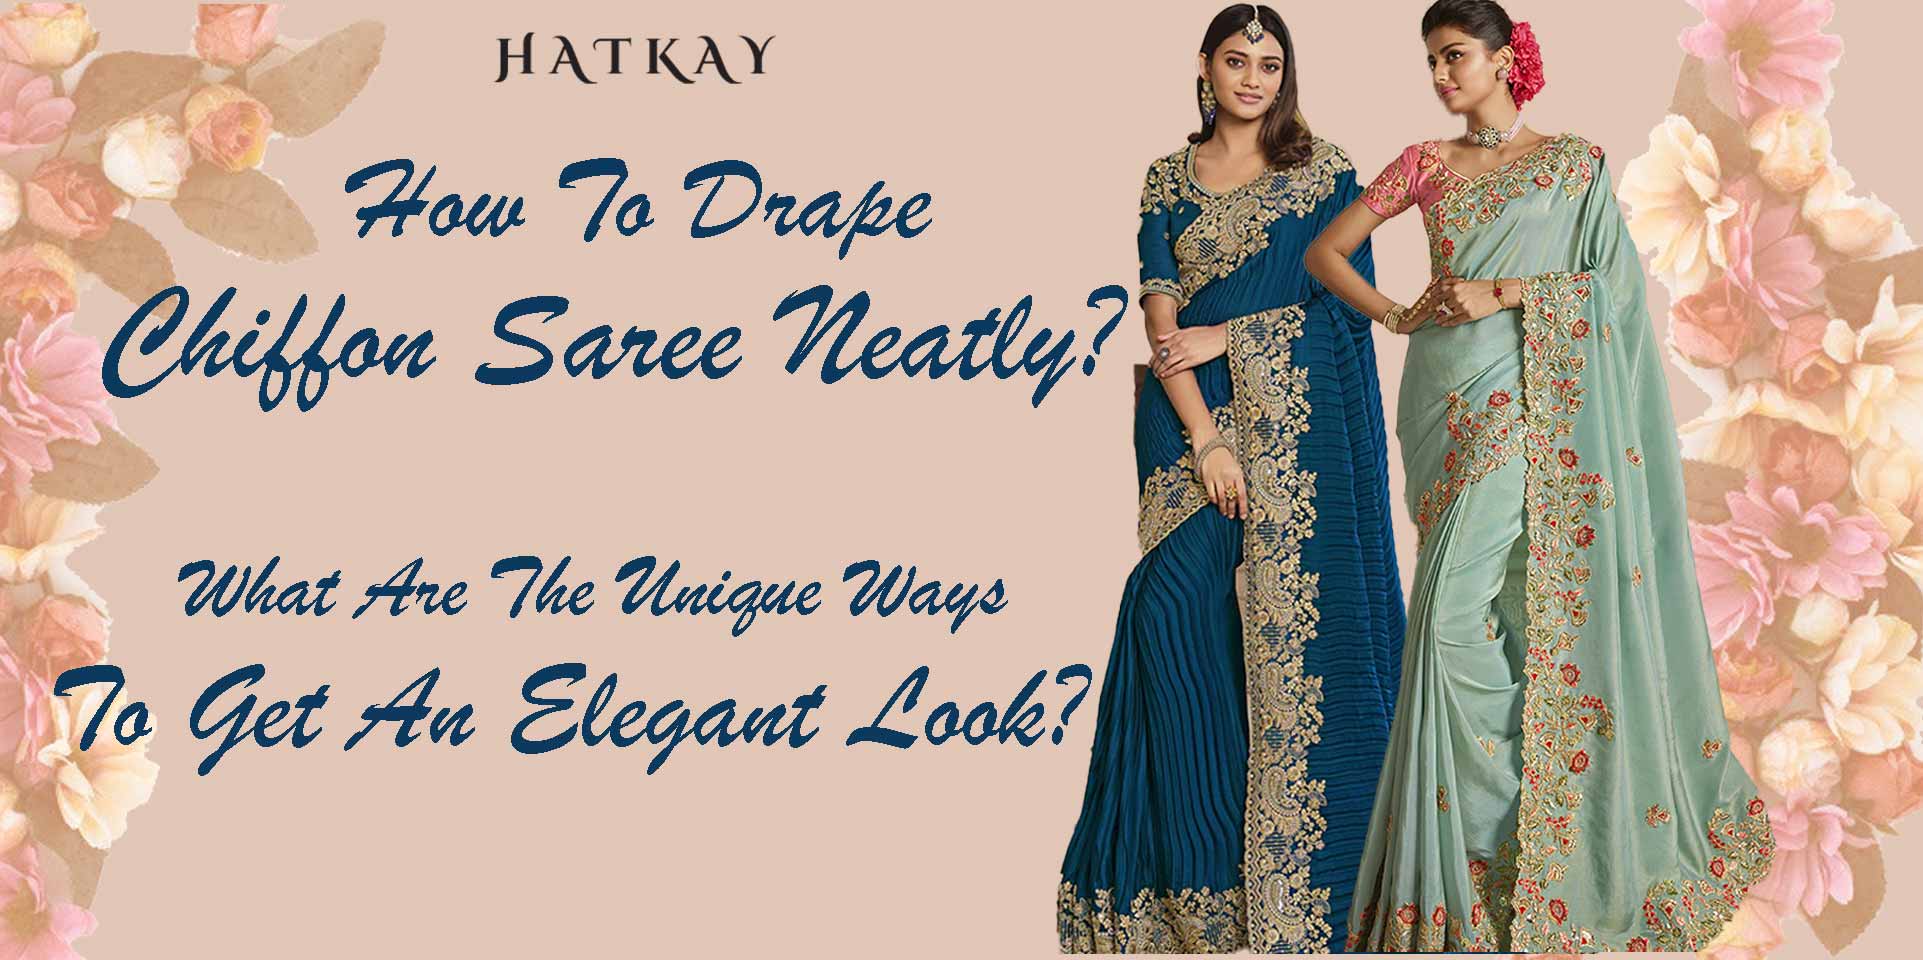 How to Drape Chiffon Saree Neatly? What are the Unique Ways to Get an Elegant Look?